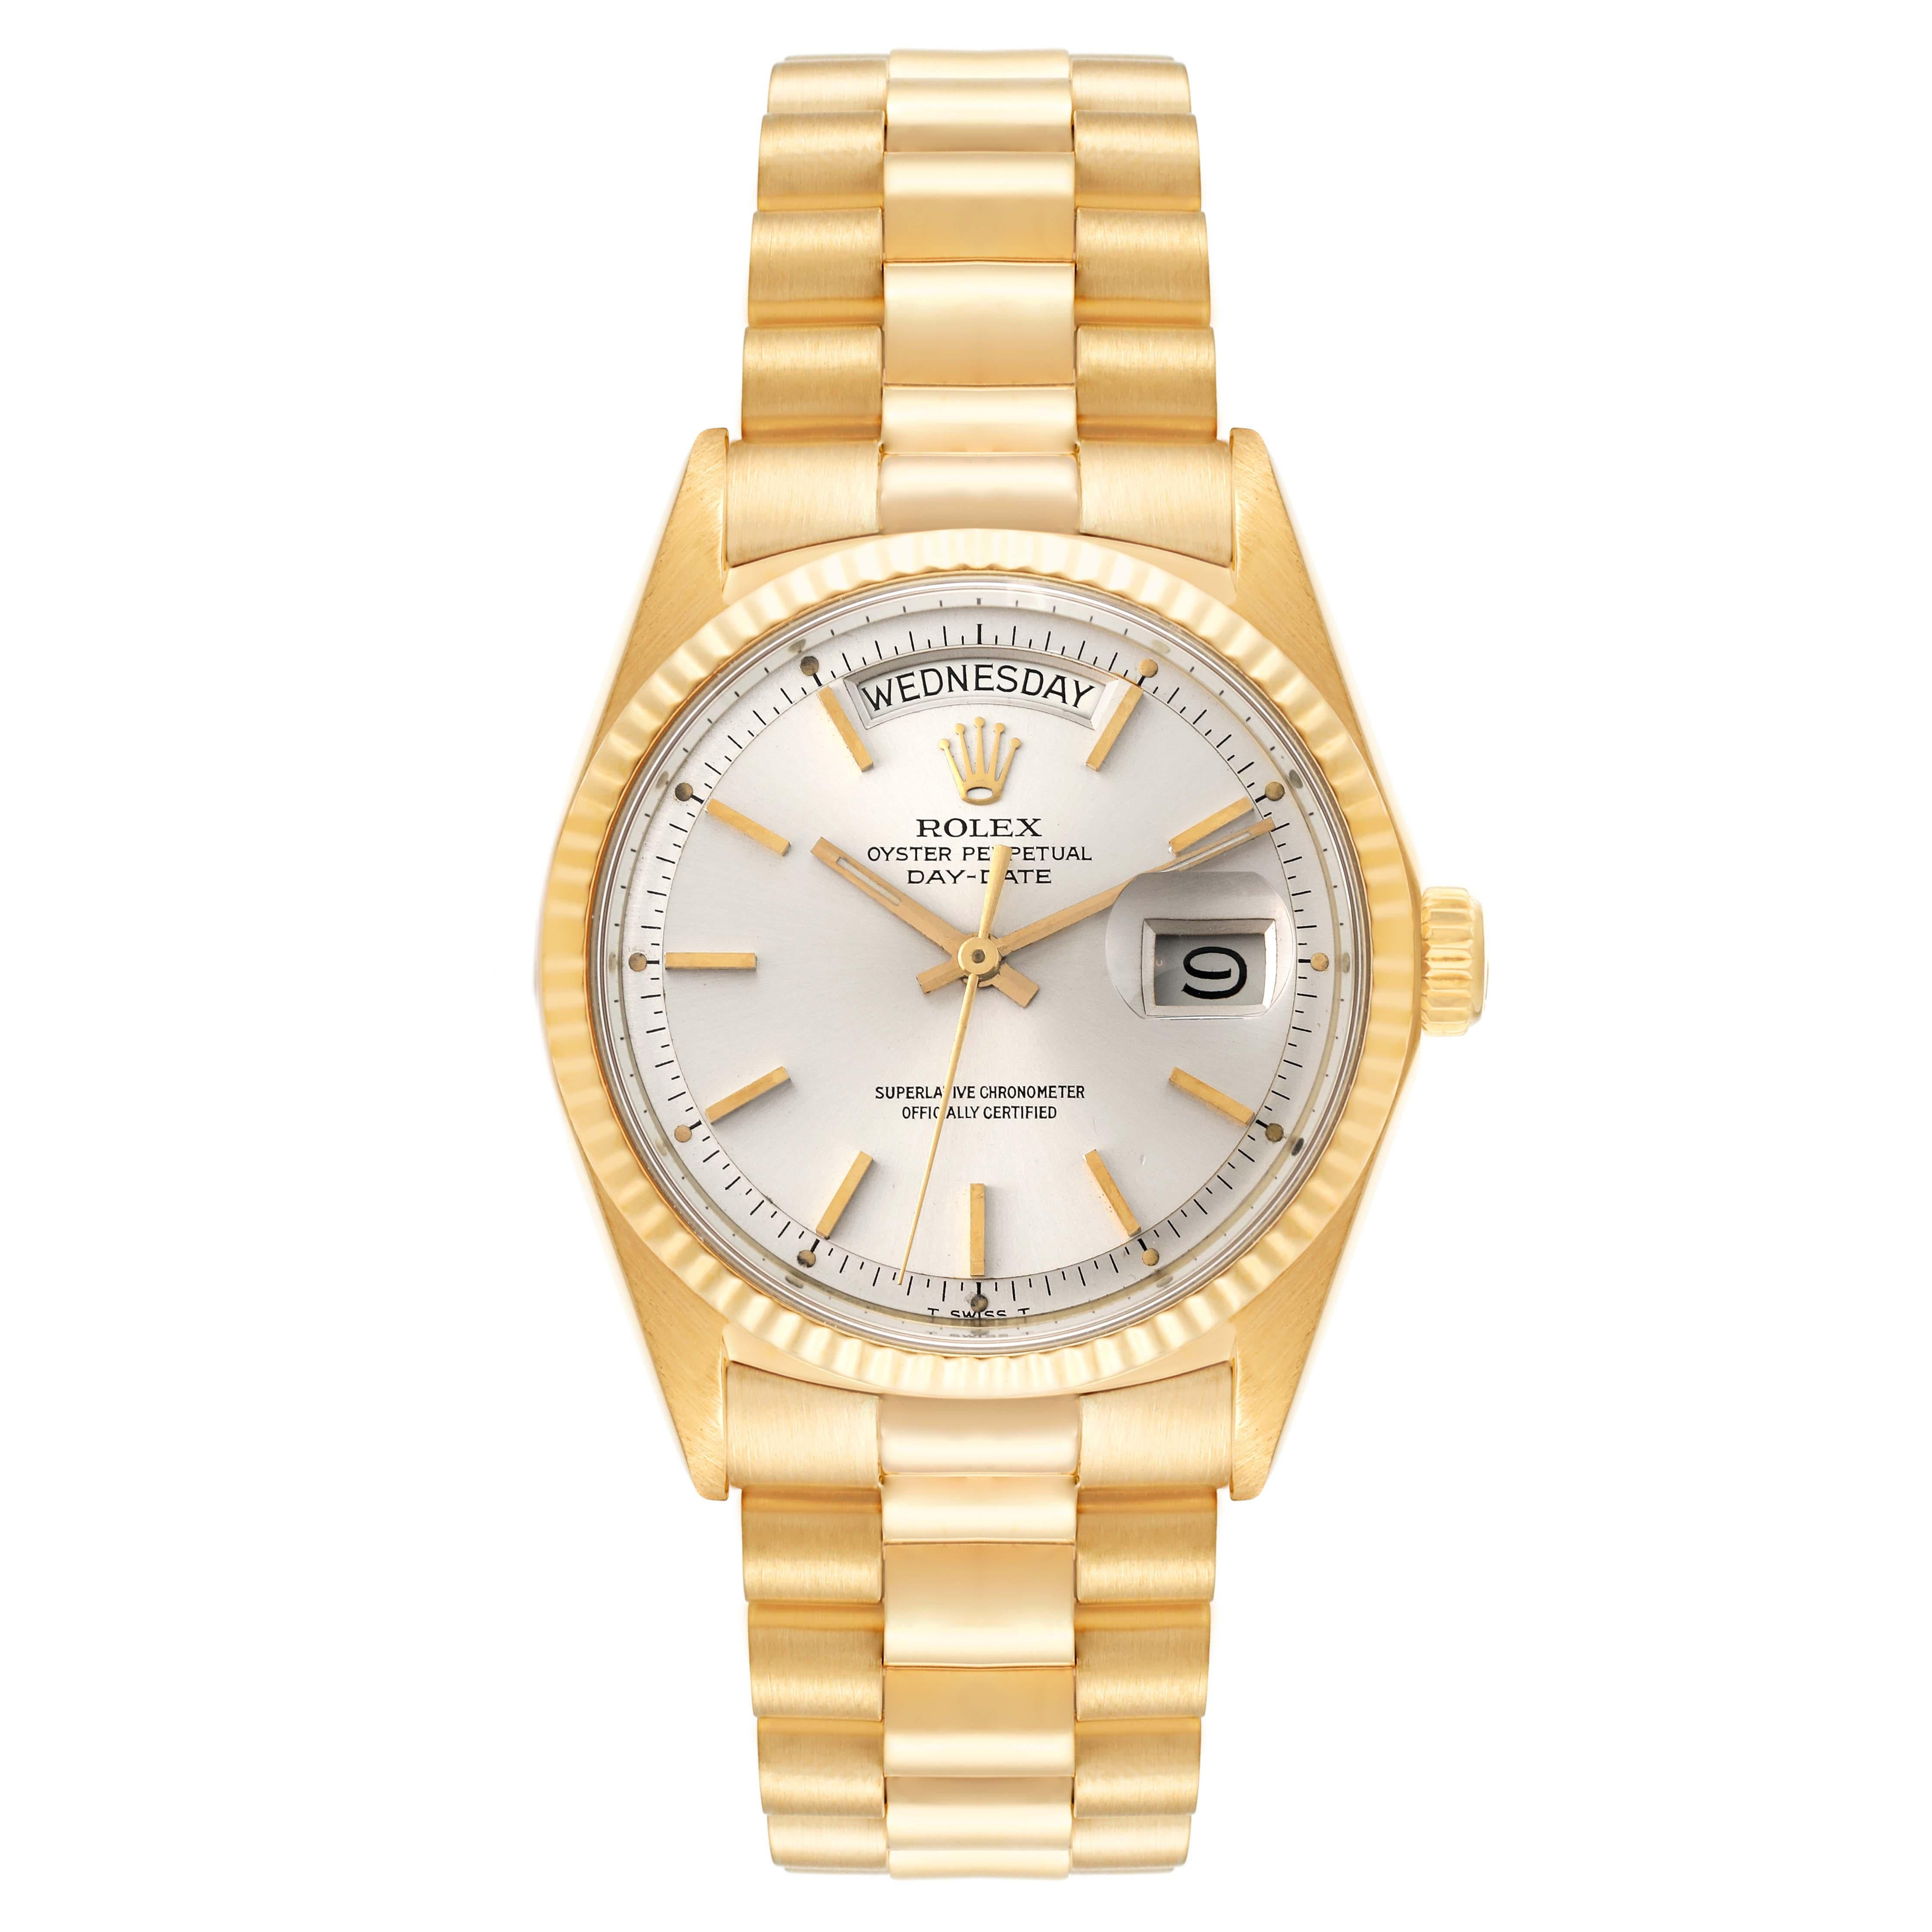 Rolex President Day-Date Silver Dial Yellow Gold Vintage Mens Watch 1803. Officially certified chronometer automatic self-winding movement. 18k yellow gold oyster case 36.0 mm in diameter.  Rolex logo on a crown. 18k yellow gold fluted bezel.